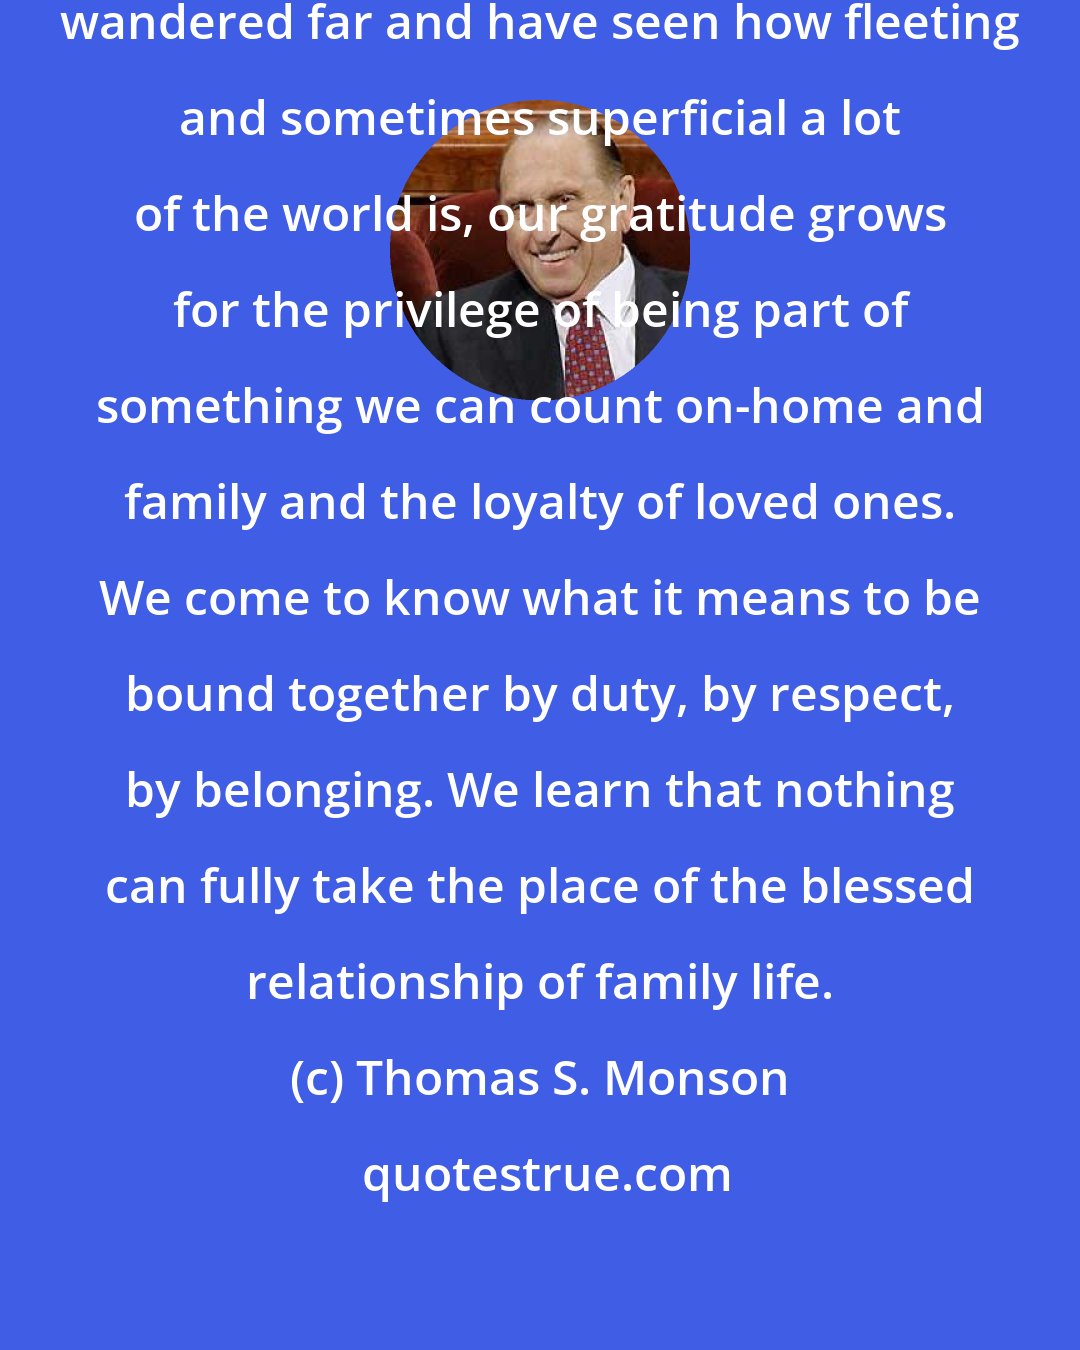 Thomas S. Monson: When we have sampled much and have wandered far and have seen how fleeting and sometimes superficial a lot of the world is, our gratitude grows for the privilege of being part of something we can count on-home and family and the loyalty of loved ones. We come to know what it means to be bound together by duty, by respect, by belonging. We learn that nothing can fully take the place of the blessed relationship of family life.